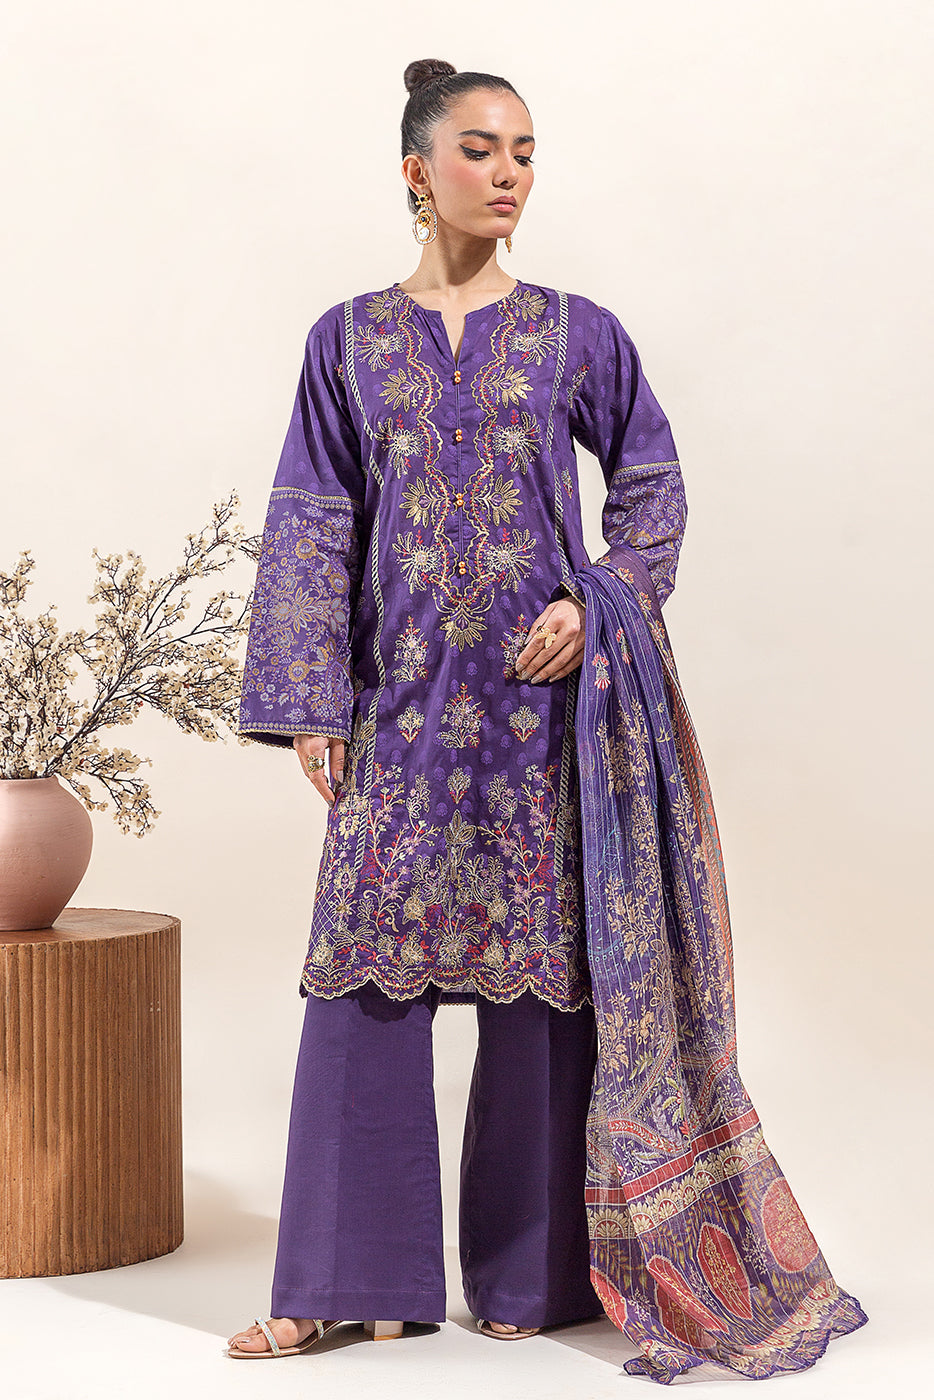 3 PIECE EMBROIDERED LAWN SUIT-ENIGMATIC CHARM (UNSTITCHED)